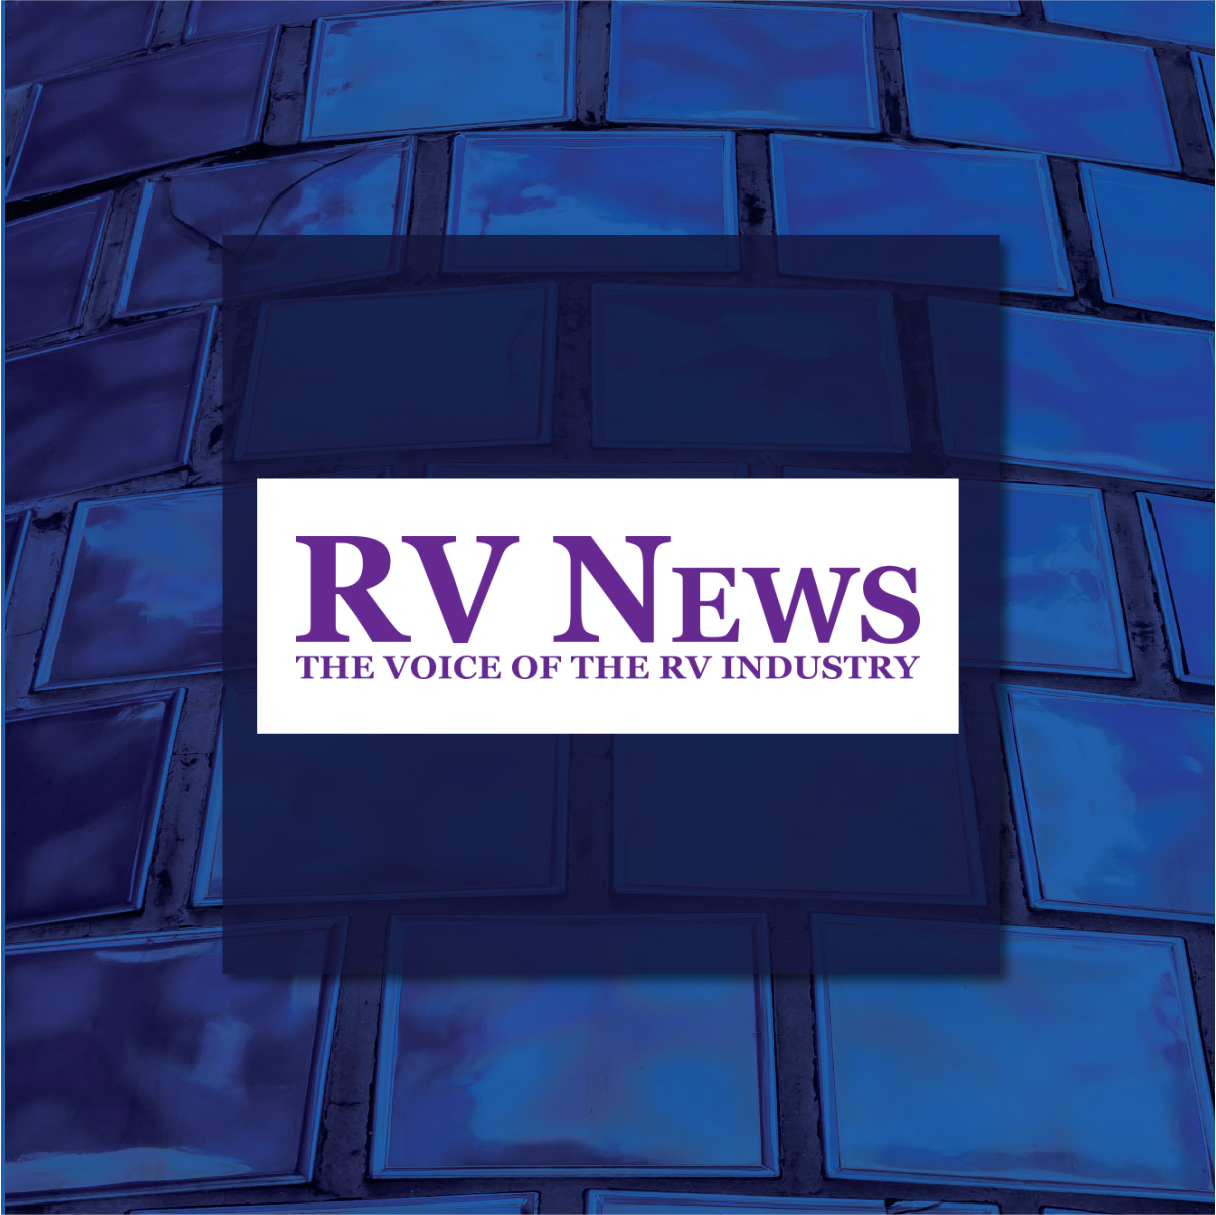 RV News articles features KPA's safety consulting